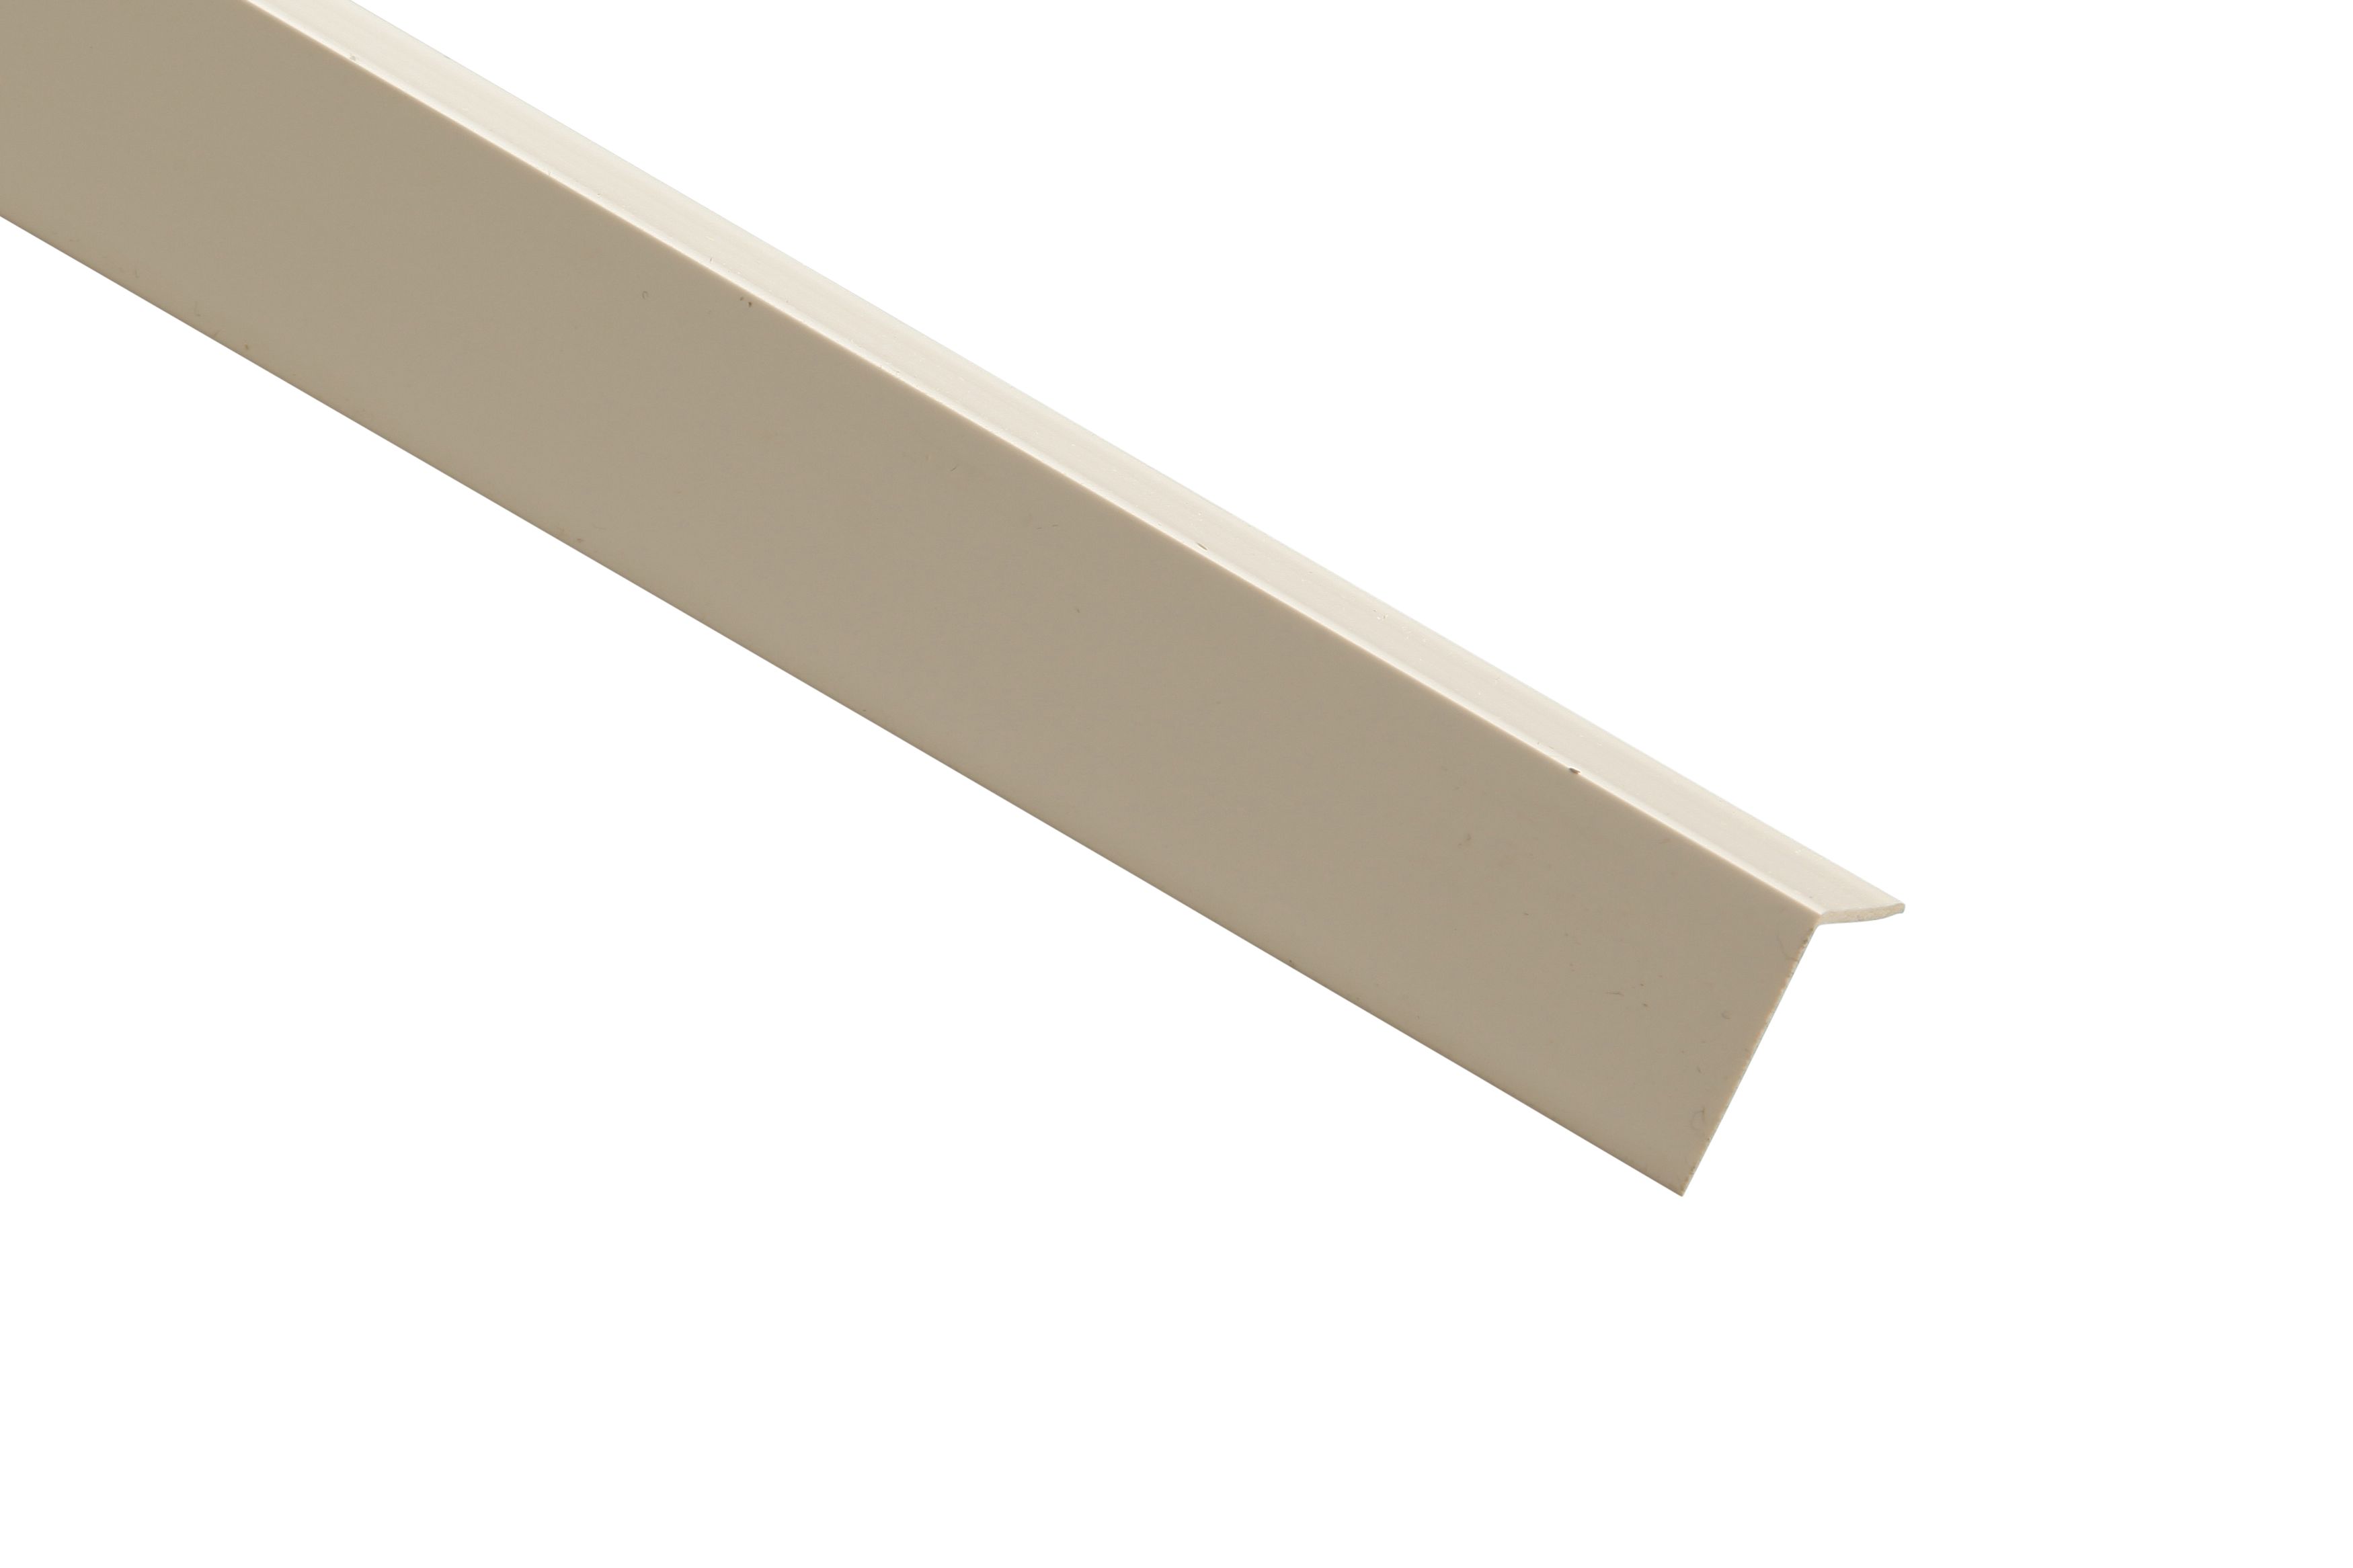 Wickes PVC Angle Moulding - 12 x 12 x 2400mm